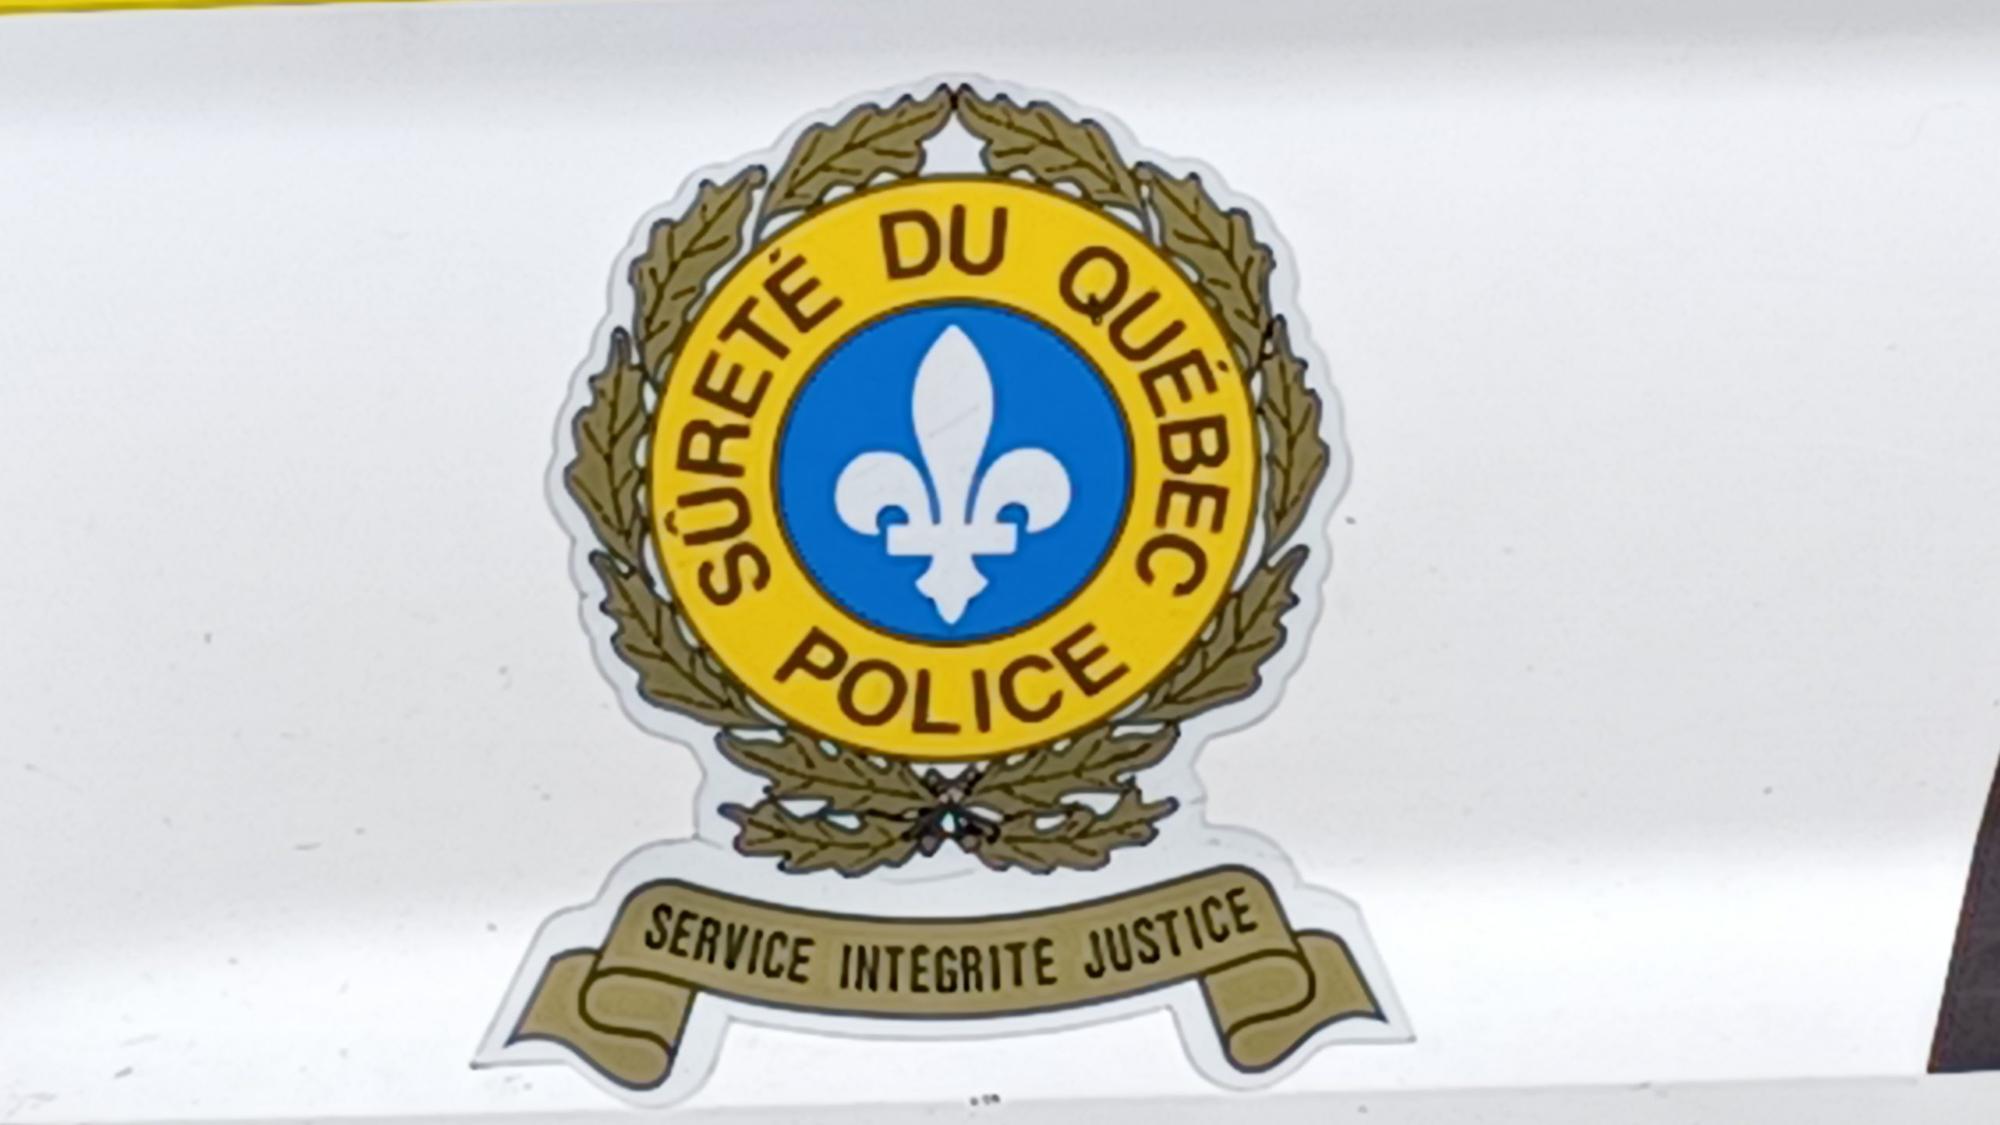 Autopsy being performed, no arrest following November 1 incident in Grenville